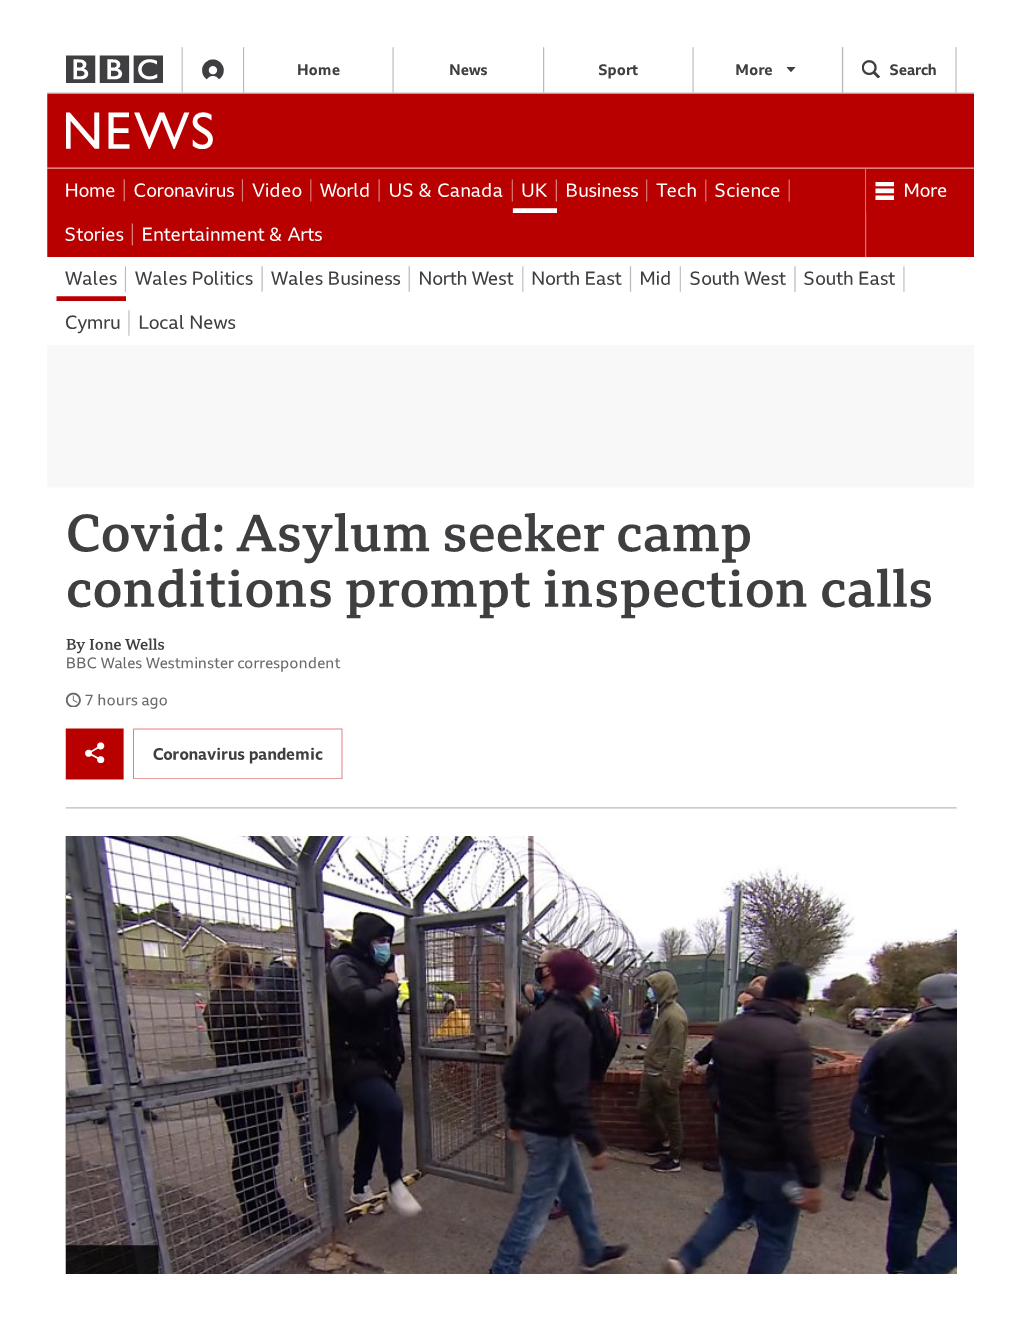 Covid: Asylum Seeker Camp Conditions Prompt Inspection Calls (BBC News)